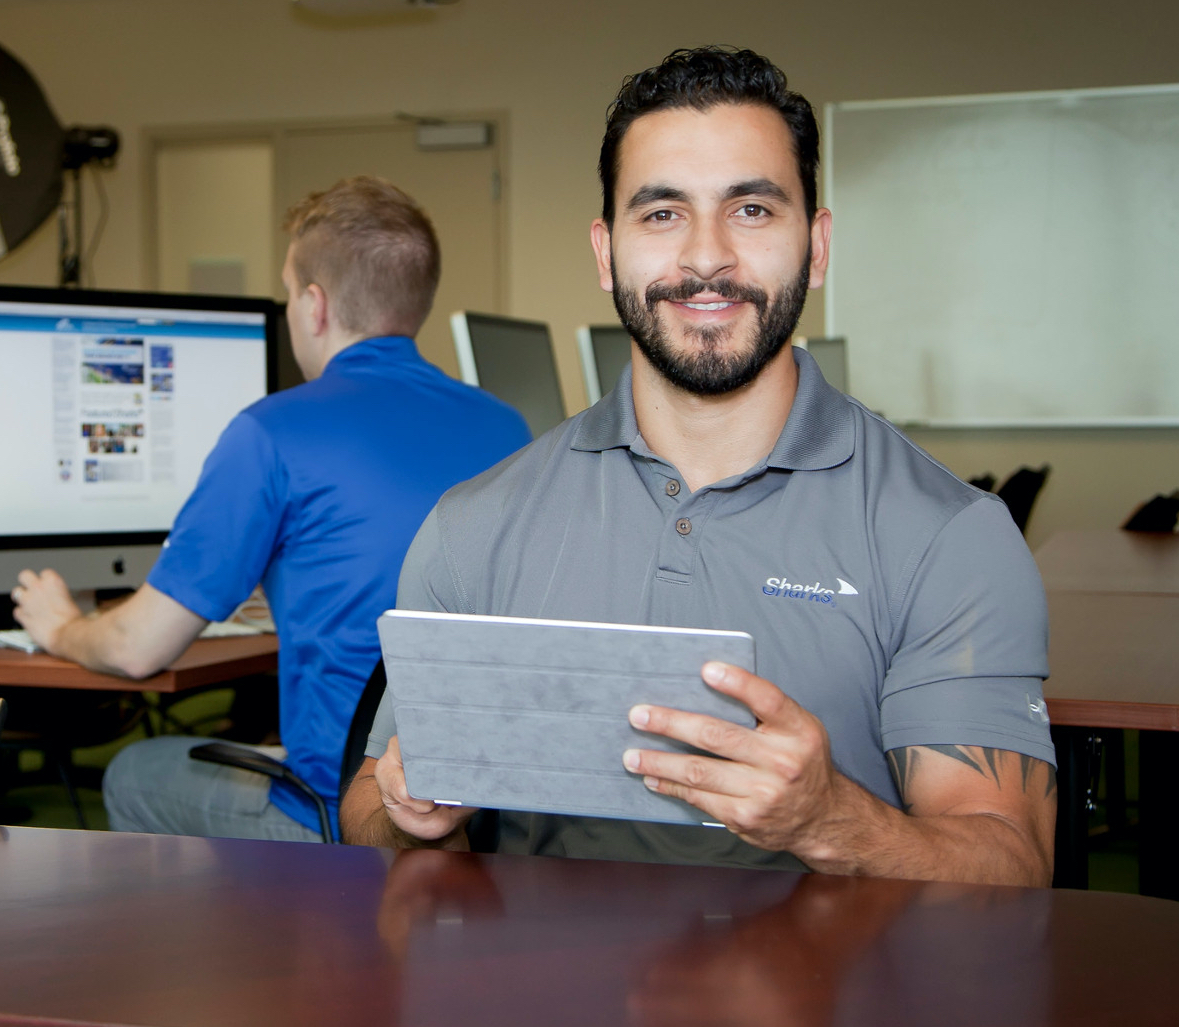 man using a tablet device with another man in the background on a computer